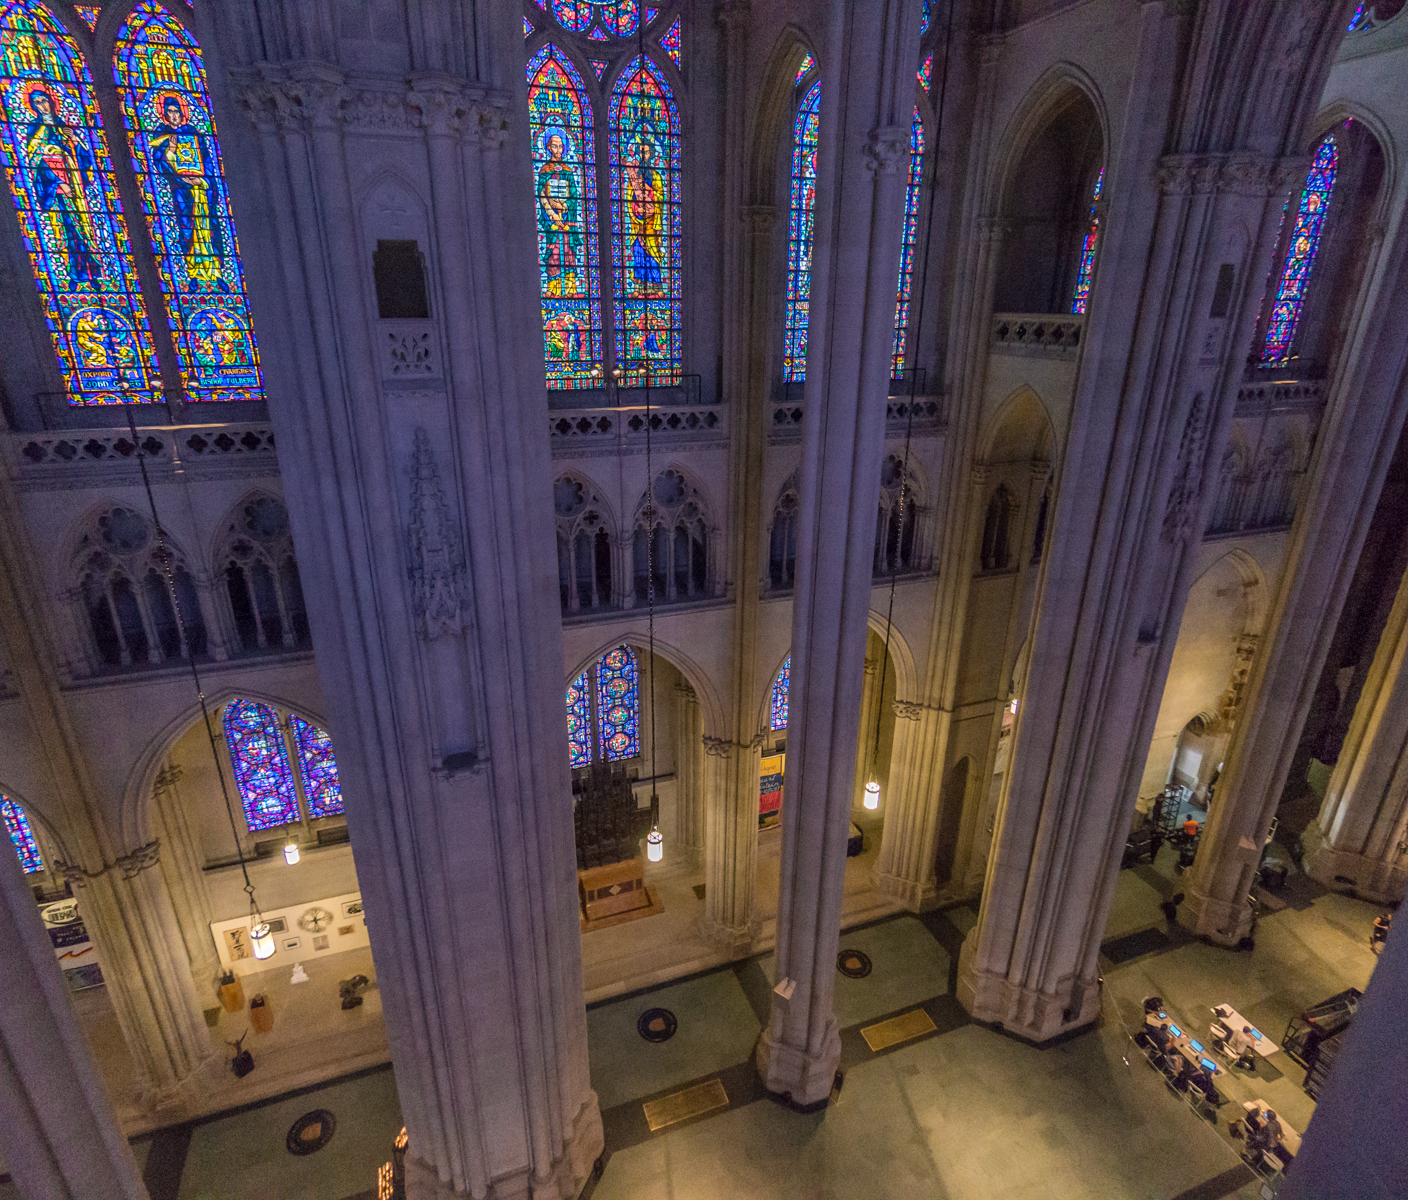 Nave of the Cathedral of Saint John the Divine (NYC) as seen during a “Vertical Tour” of the cathedral | Photo by Mike Hudak